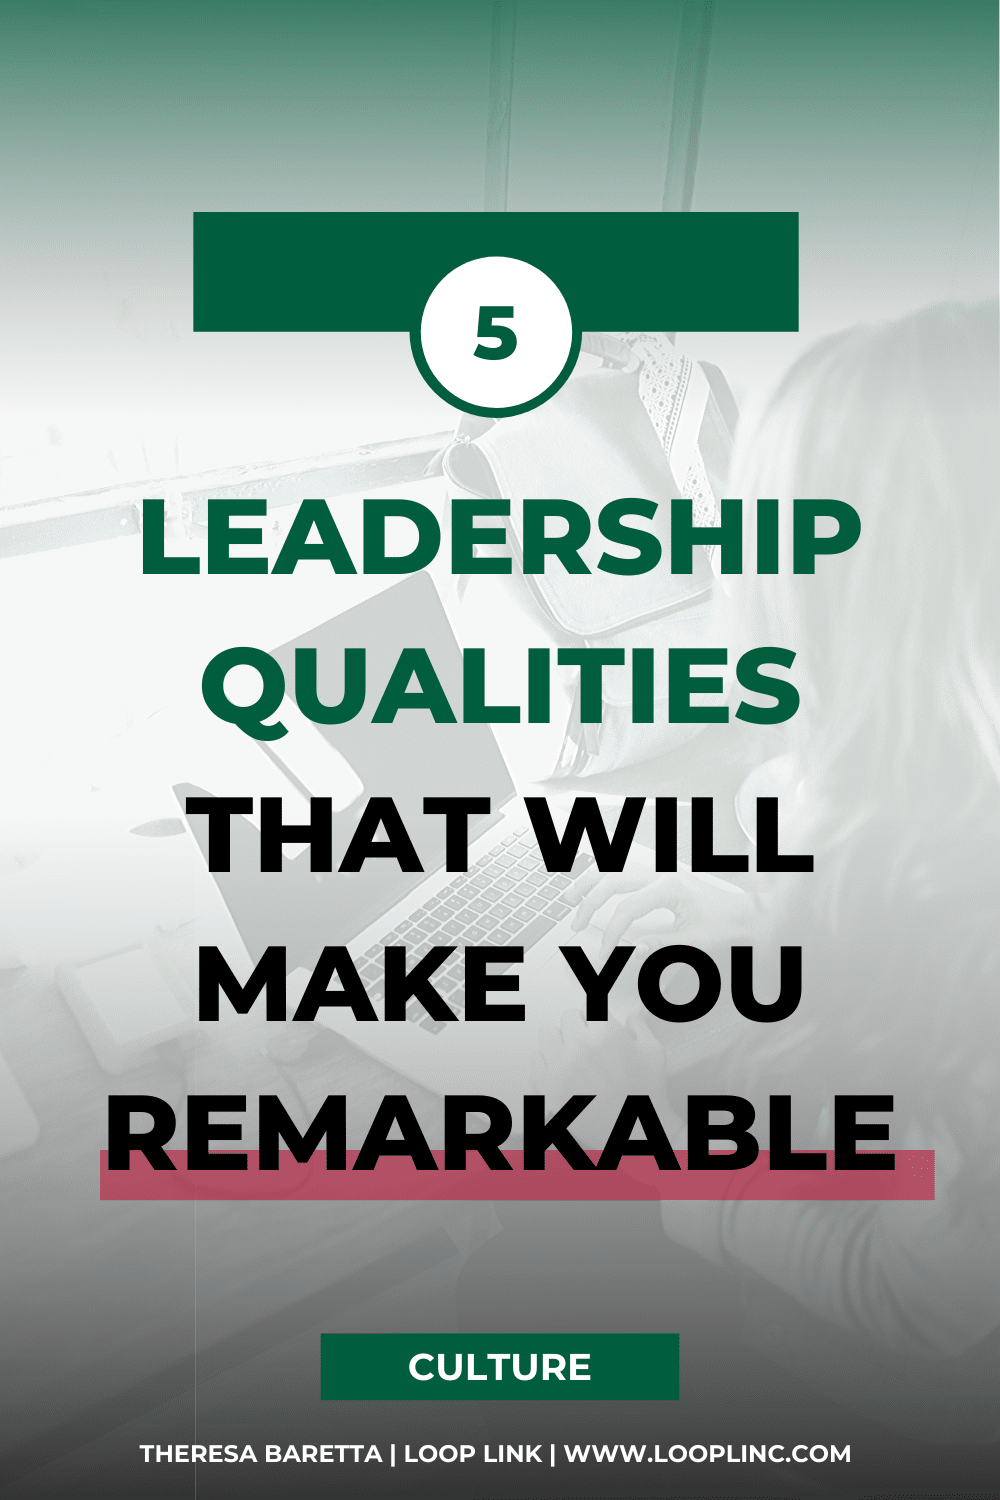 5 Leadership Qualities That Will Make You Remarkable